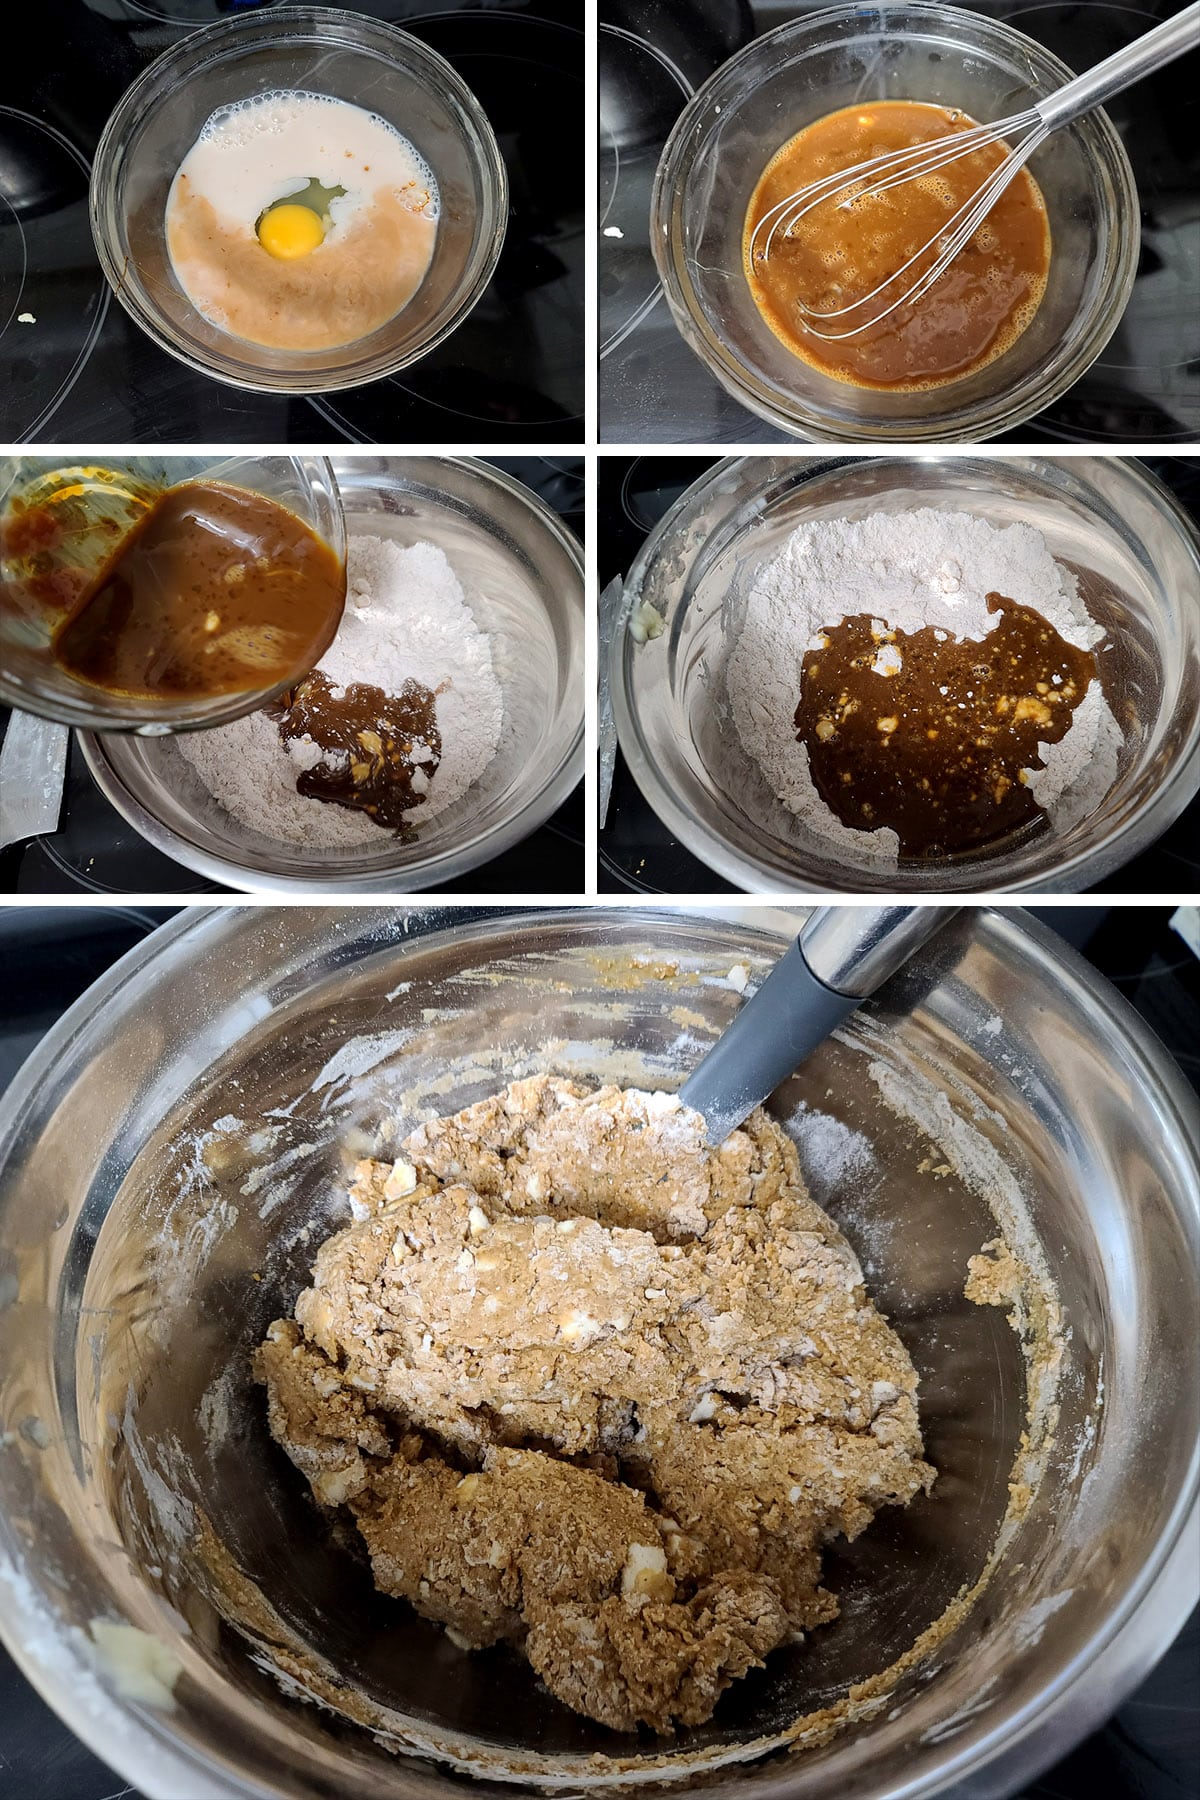 A 5 part image showing the wet ingredients being mixed and added to the dry ingredients, forming a brown dough.